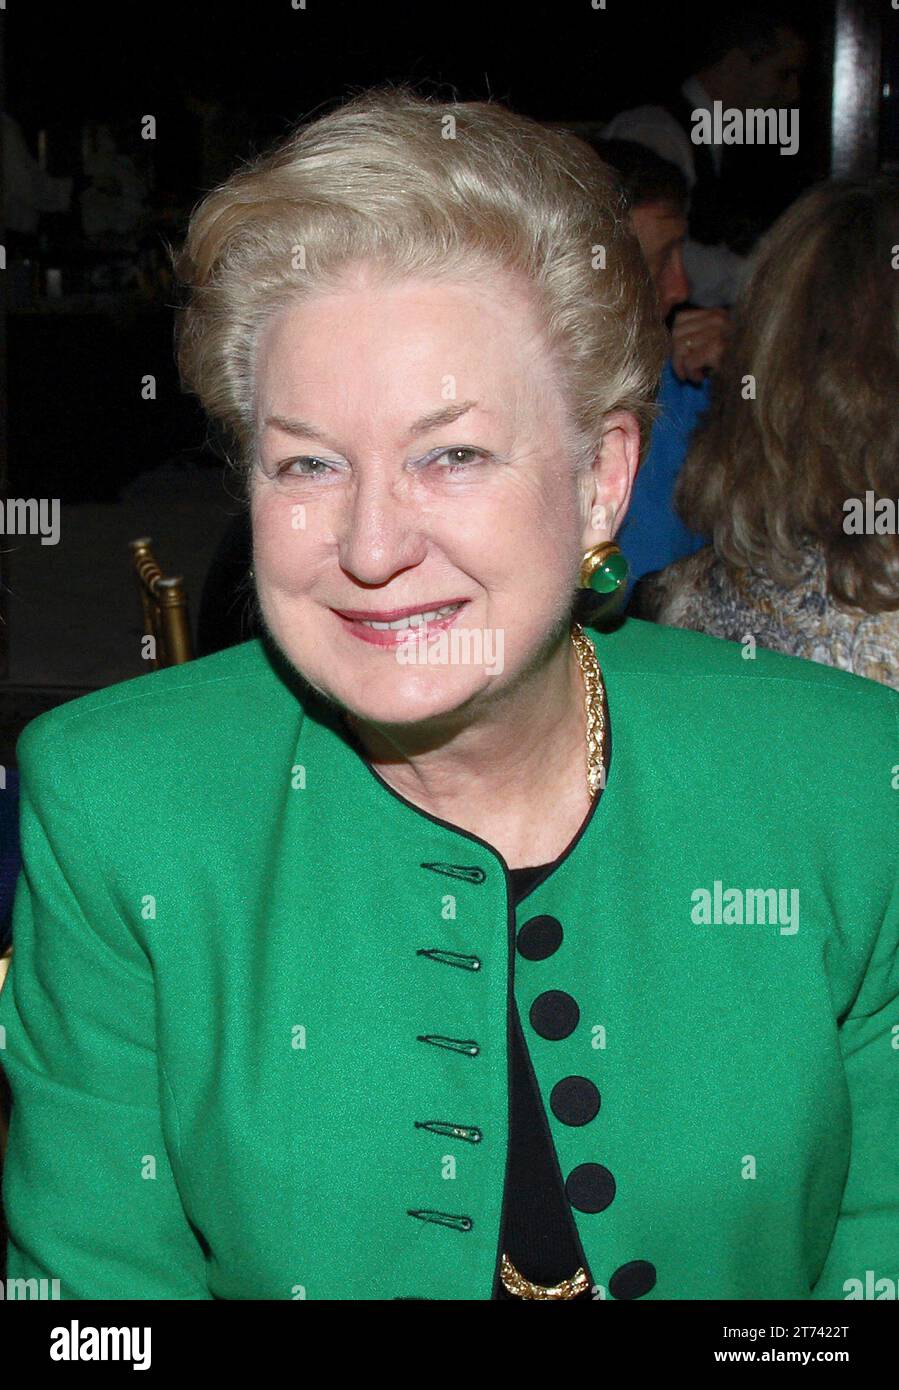 **FILE PHOTO** MaryAnne Trump Barry Has Passed Away. PALM BEACH, FL - 2009: MaryAnne Trump Barry at the Mar-A-Lago Club in 2009 in Palm Beach, Florida. Copyright: xMPI122x/xMediaPunchx Stock Photo